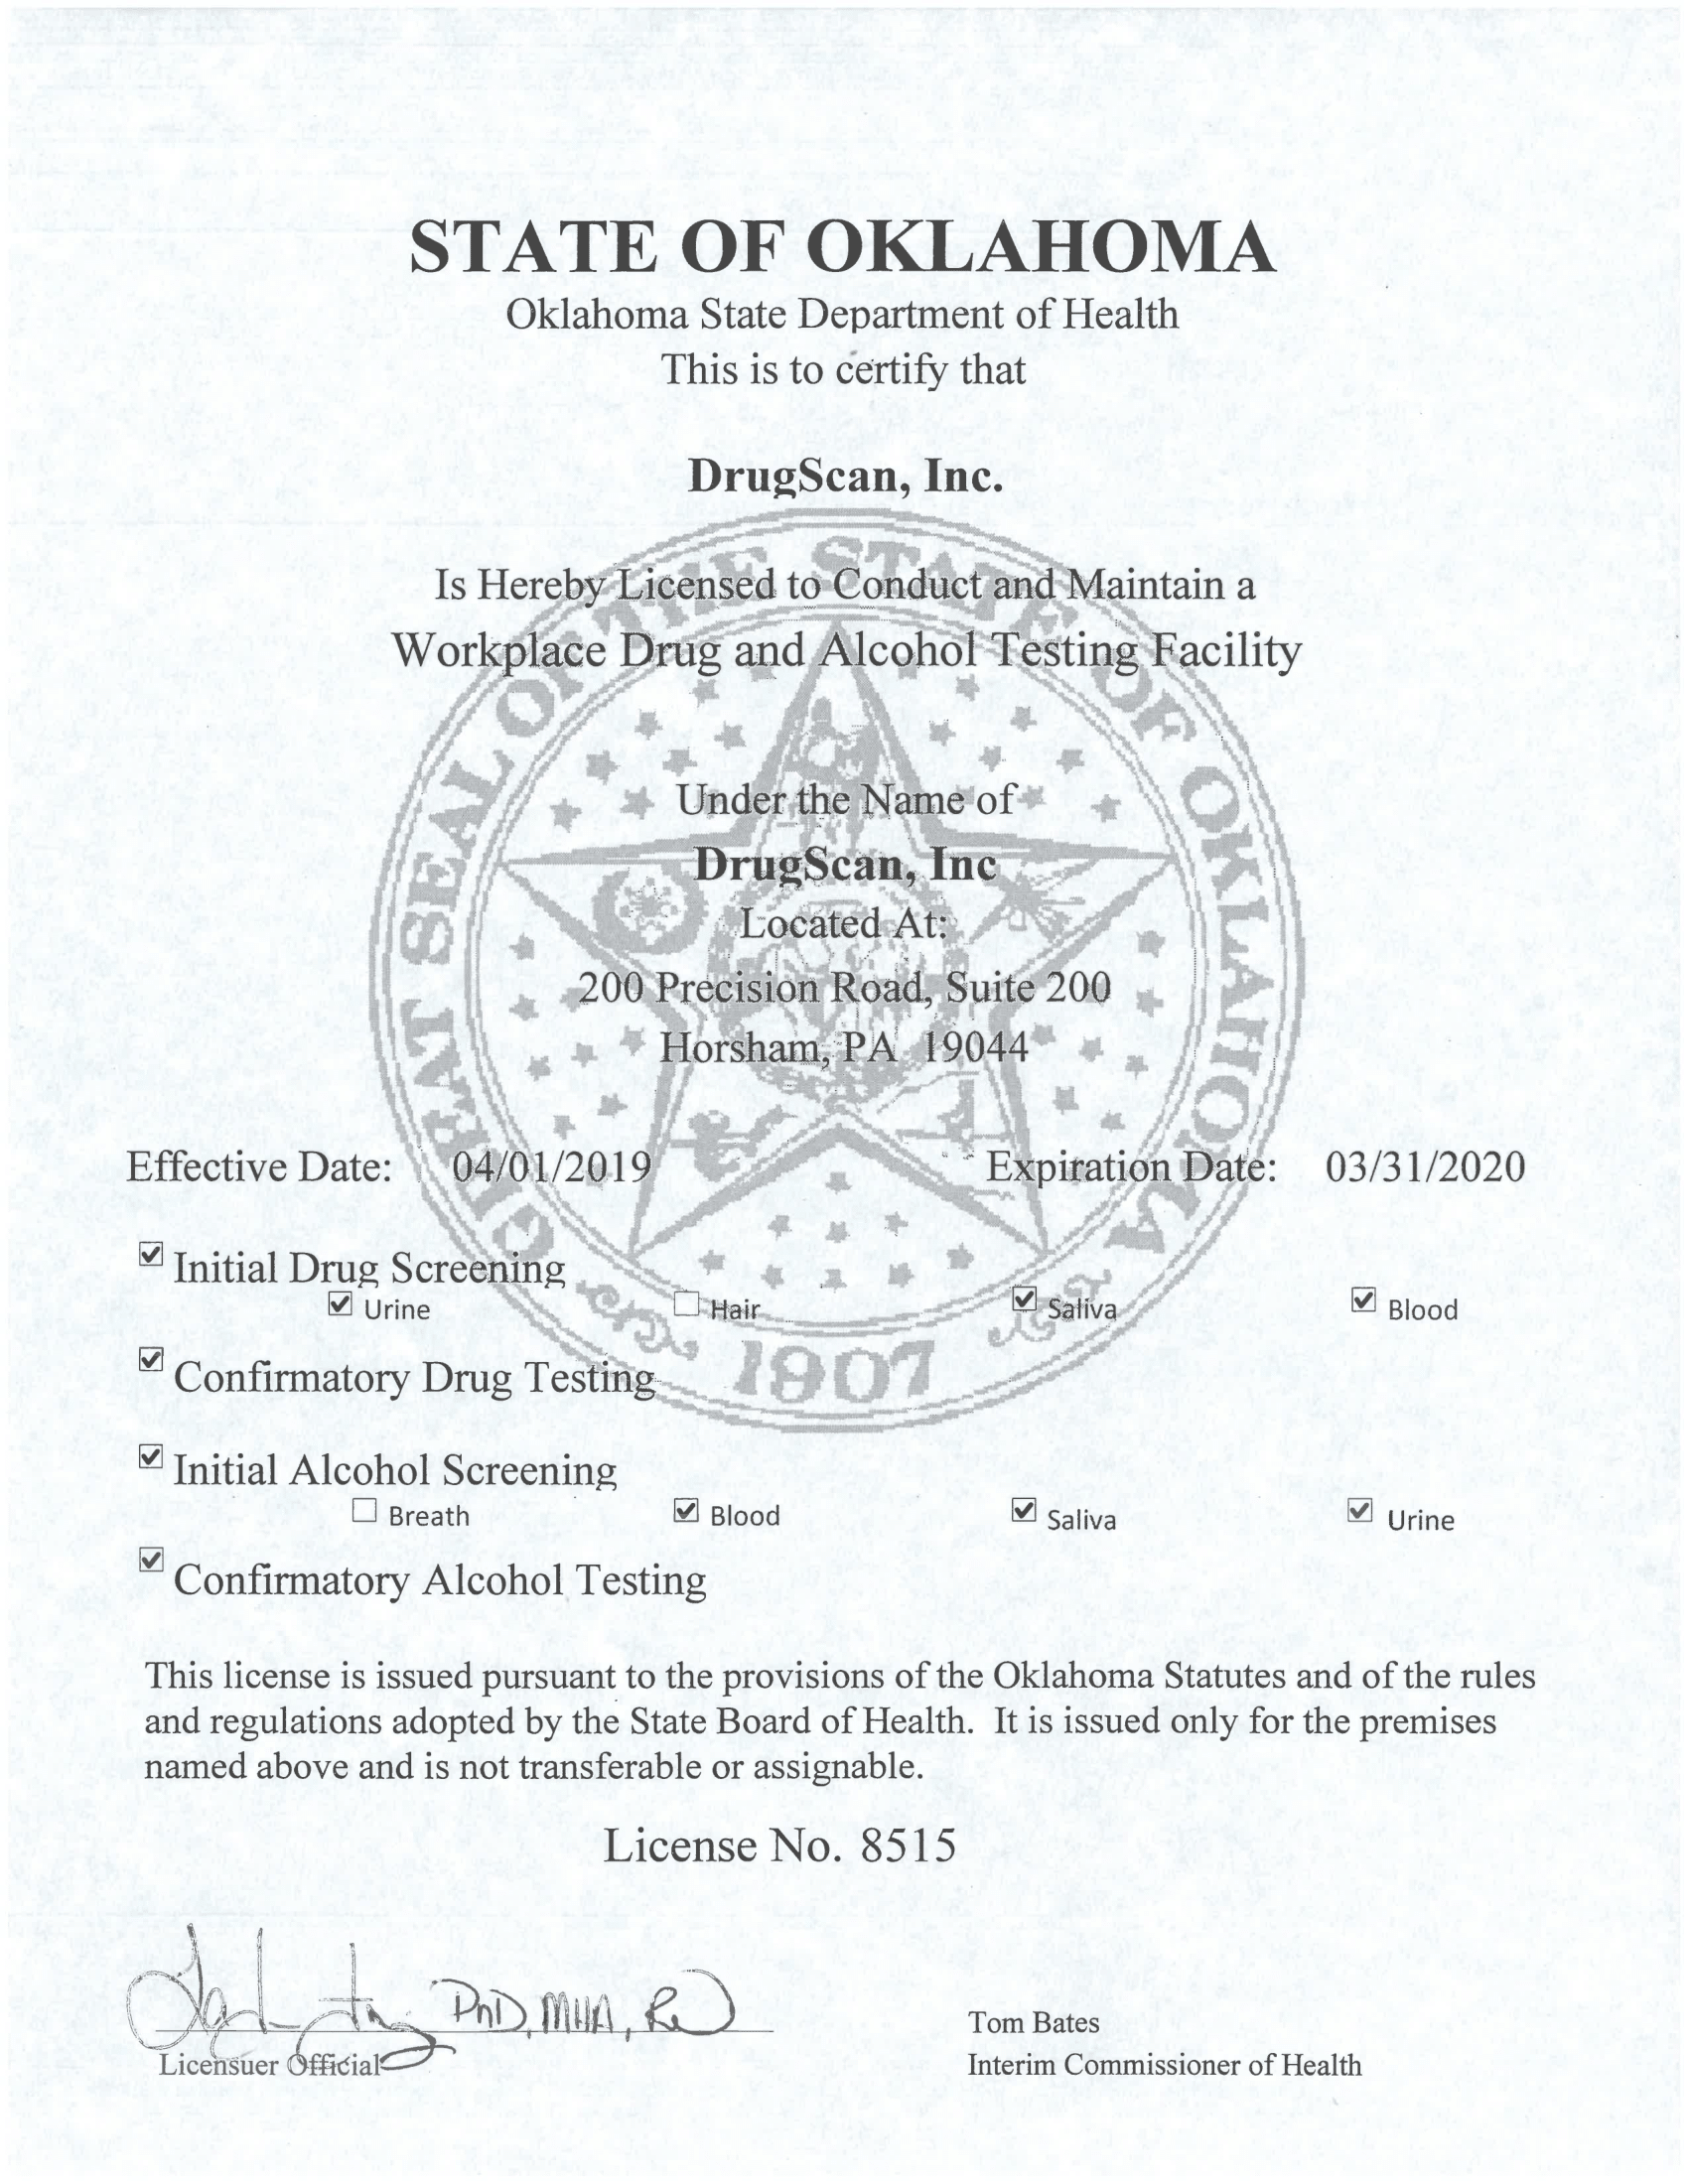 State of Oklahoma Workplace Drug and Alcohol Testing Facility License